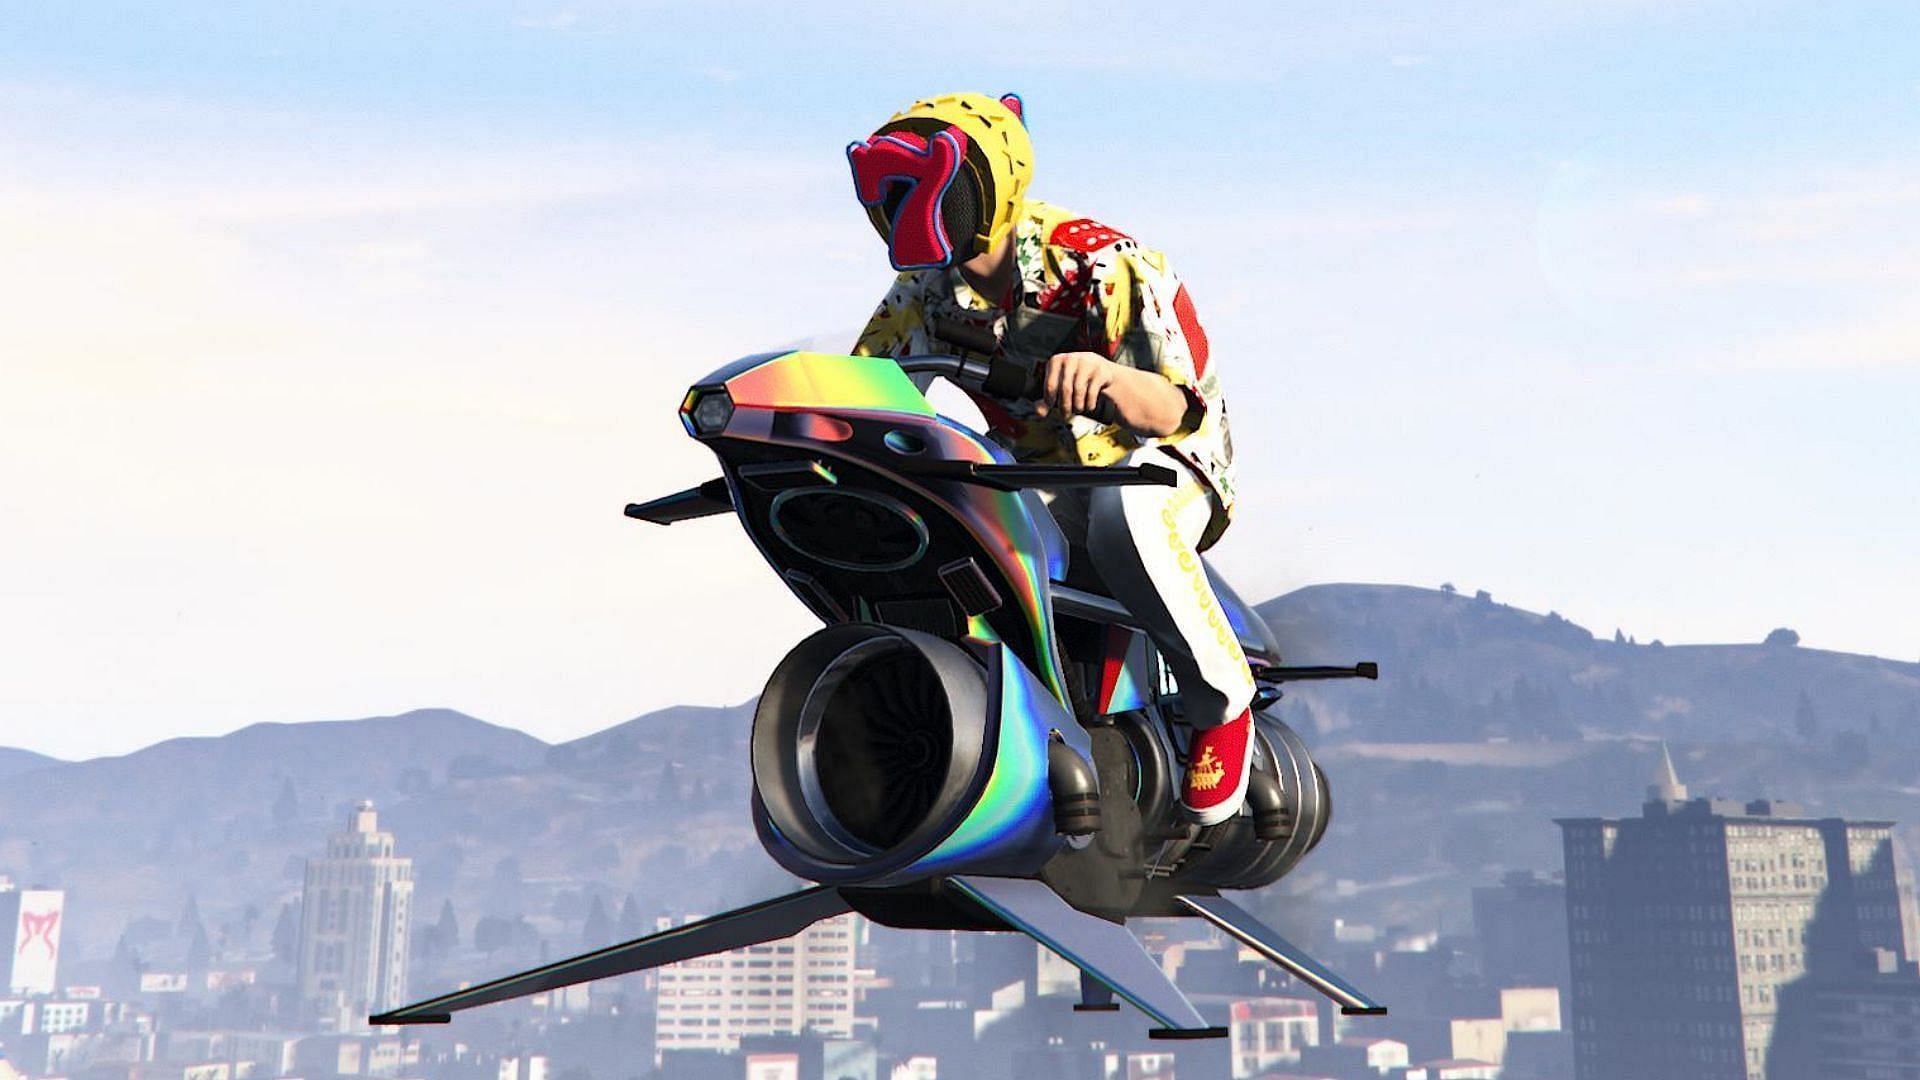 Most GTA Online players should know the flying broomstick (Image via Rockstar Games)